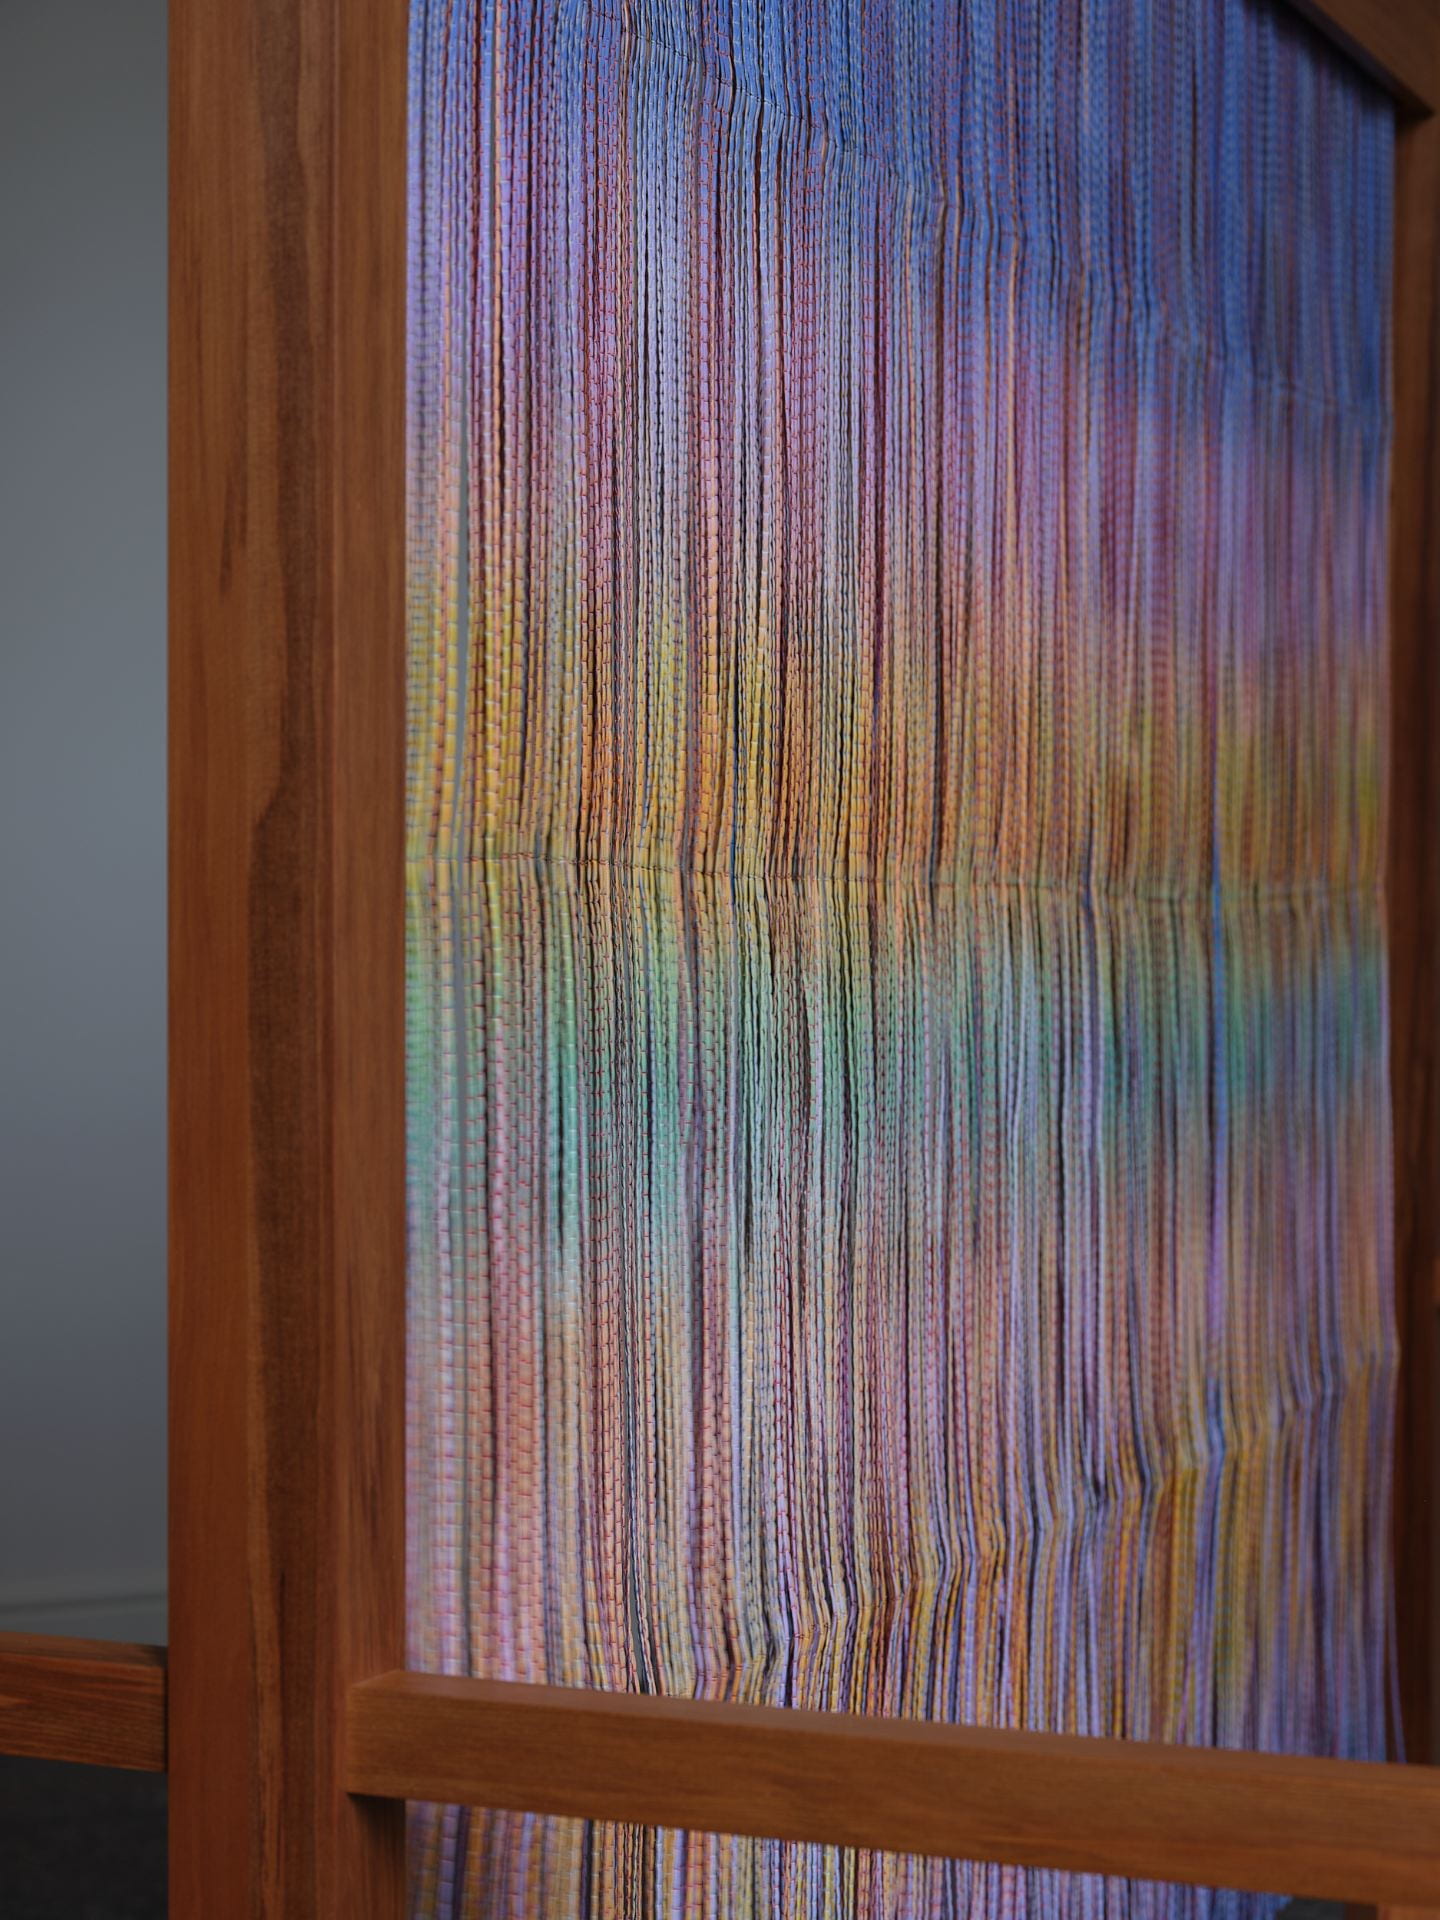 Close-up of a wooden structure with a veil hanging from it. The veil is made up of multicoloured strands in purples, oranges, greens and pinks.